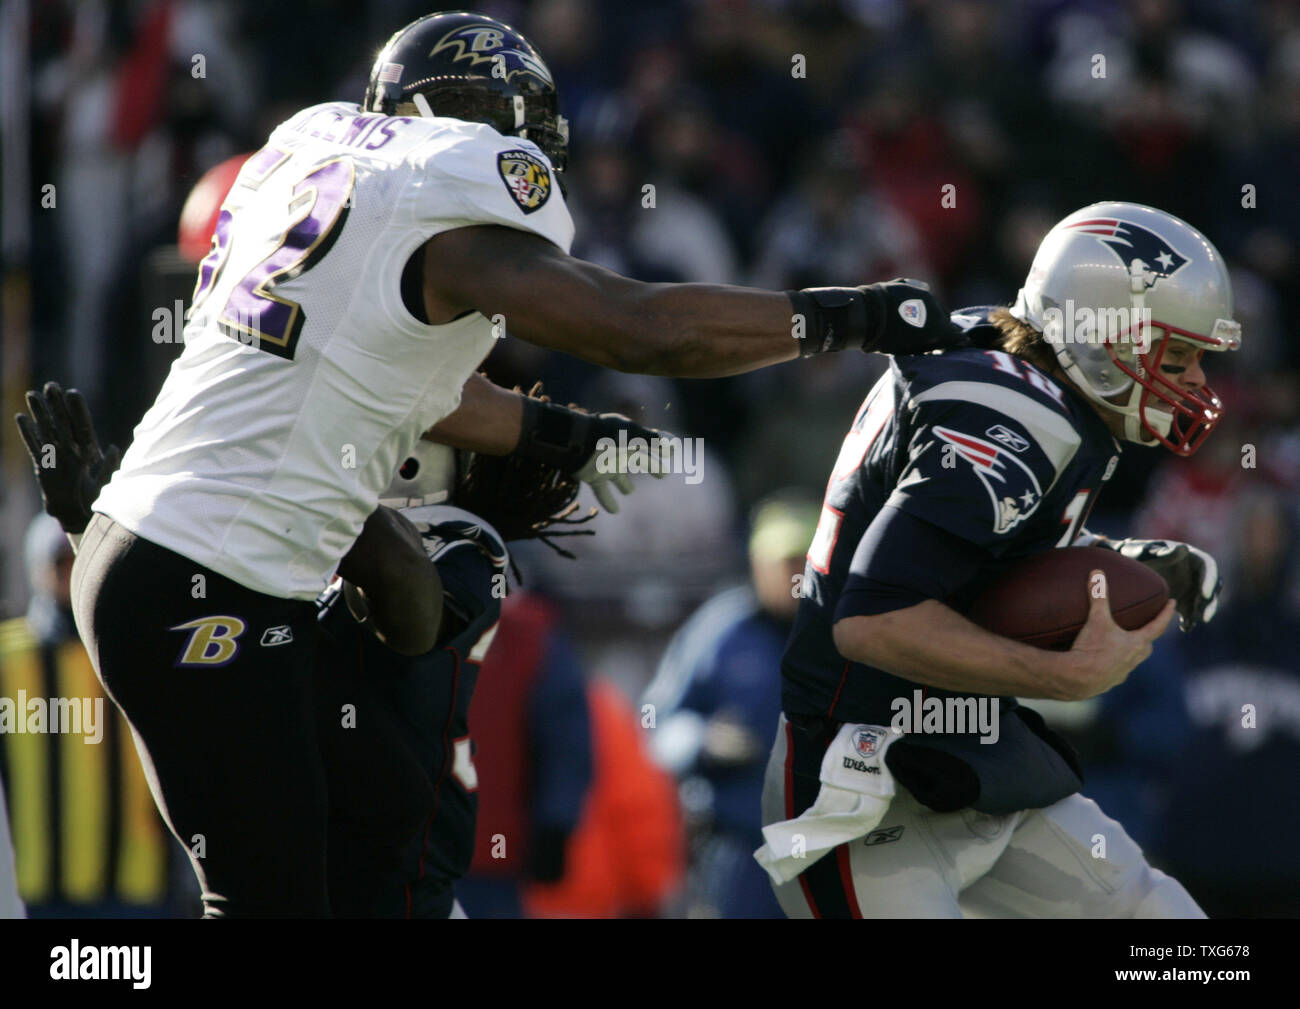 Baltimore Ravens linebacker Ray Lewis (52) drags down New England Patriots quarterback Tom Brady (12) for a sack in the first quarter of the AFC Wildcard game at Gillette Stadium in Foxboro, Massachusetts on January 10, 2010.    UPI/Matthew Healey Stock Photo